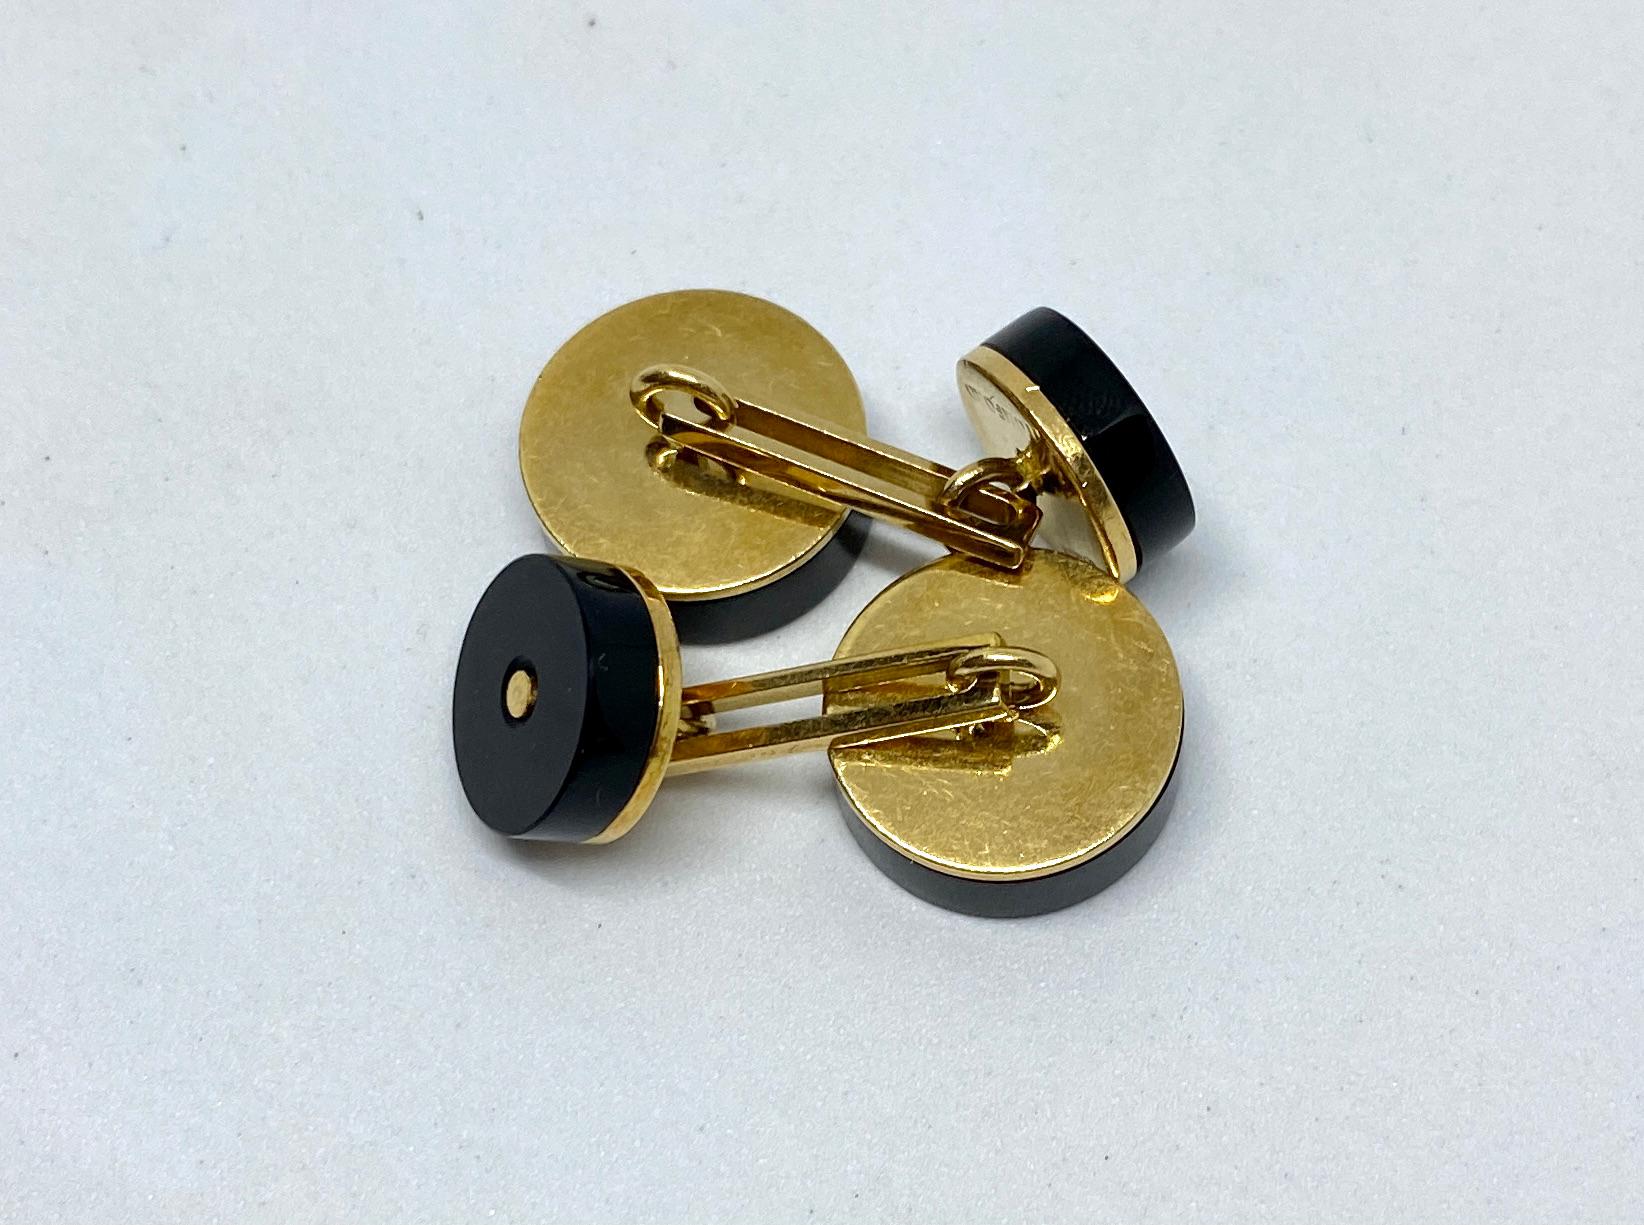 Tom Ford Double-Sided Cufflinks in 18K Yellow Gold and Black Onyx In Excellent Condition For Sale In San Rafael, CA